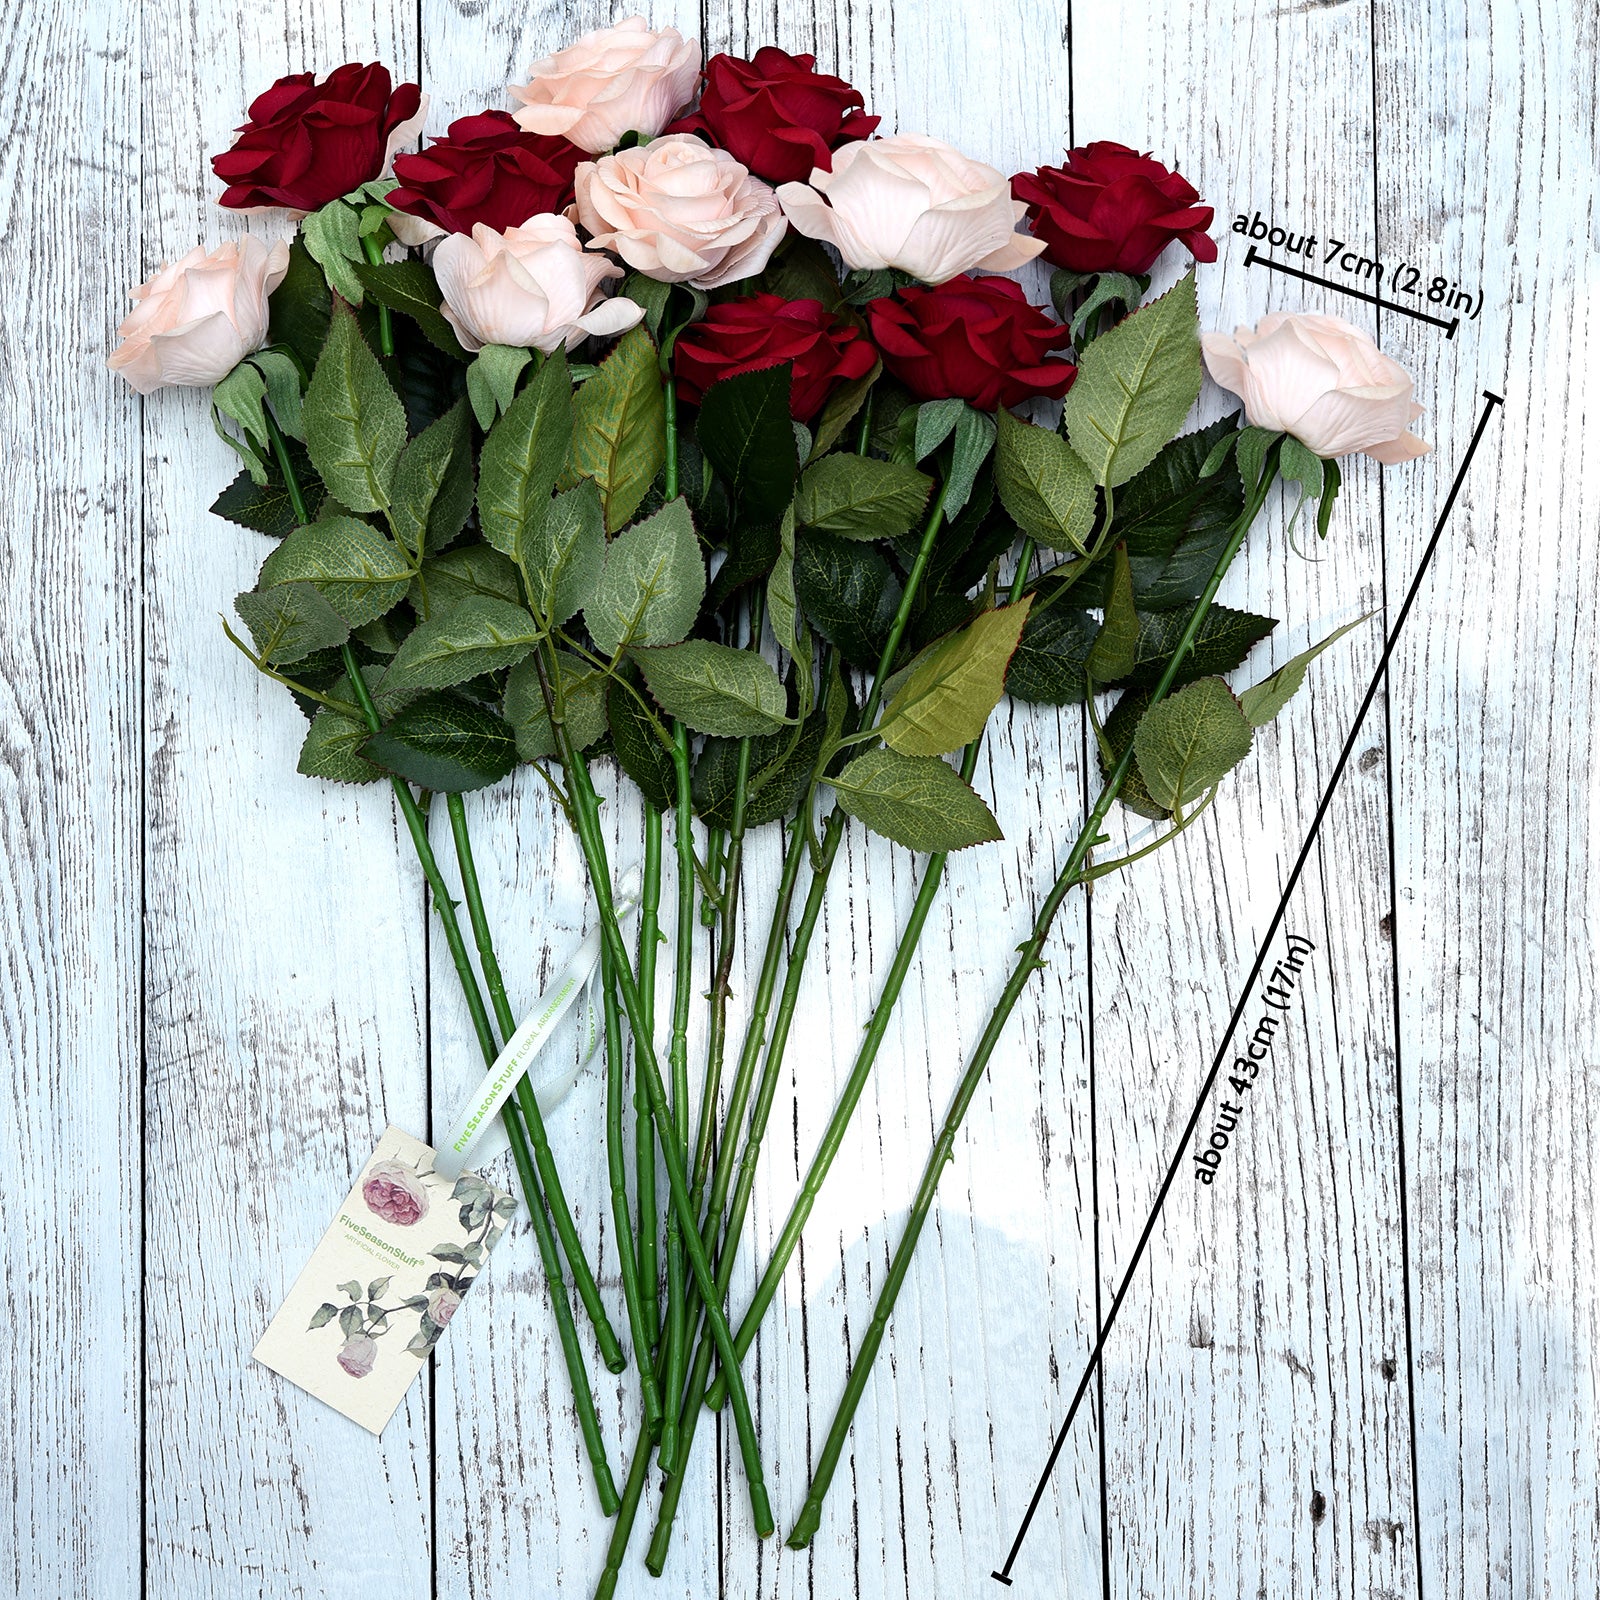 Real Touch 12 Stems "Pretty Charming" Mix Color Silk Artificial Roses Flowers ‘Petals Feel and Look like Fresh Roses'